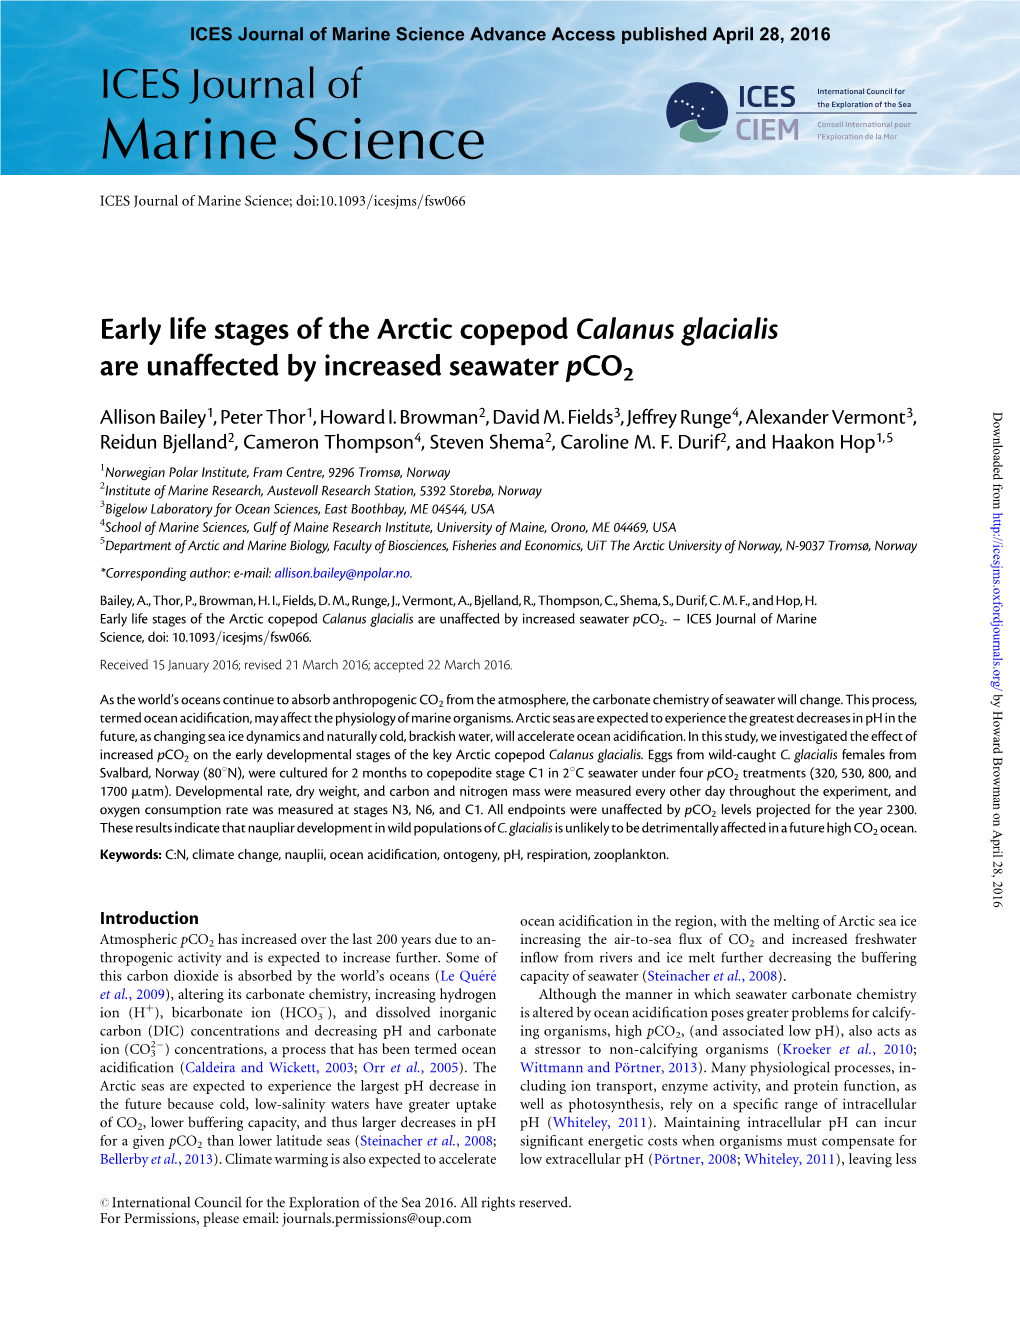 Early Life Stages of the Arctic Copepod Calanus Glacialis Are Unaffected by Increased Seawater Pco2